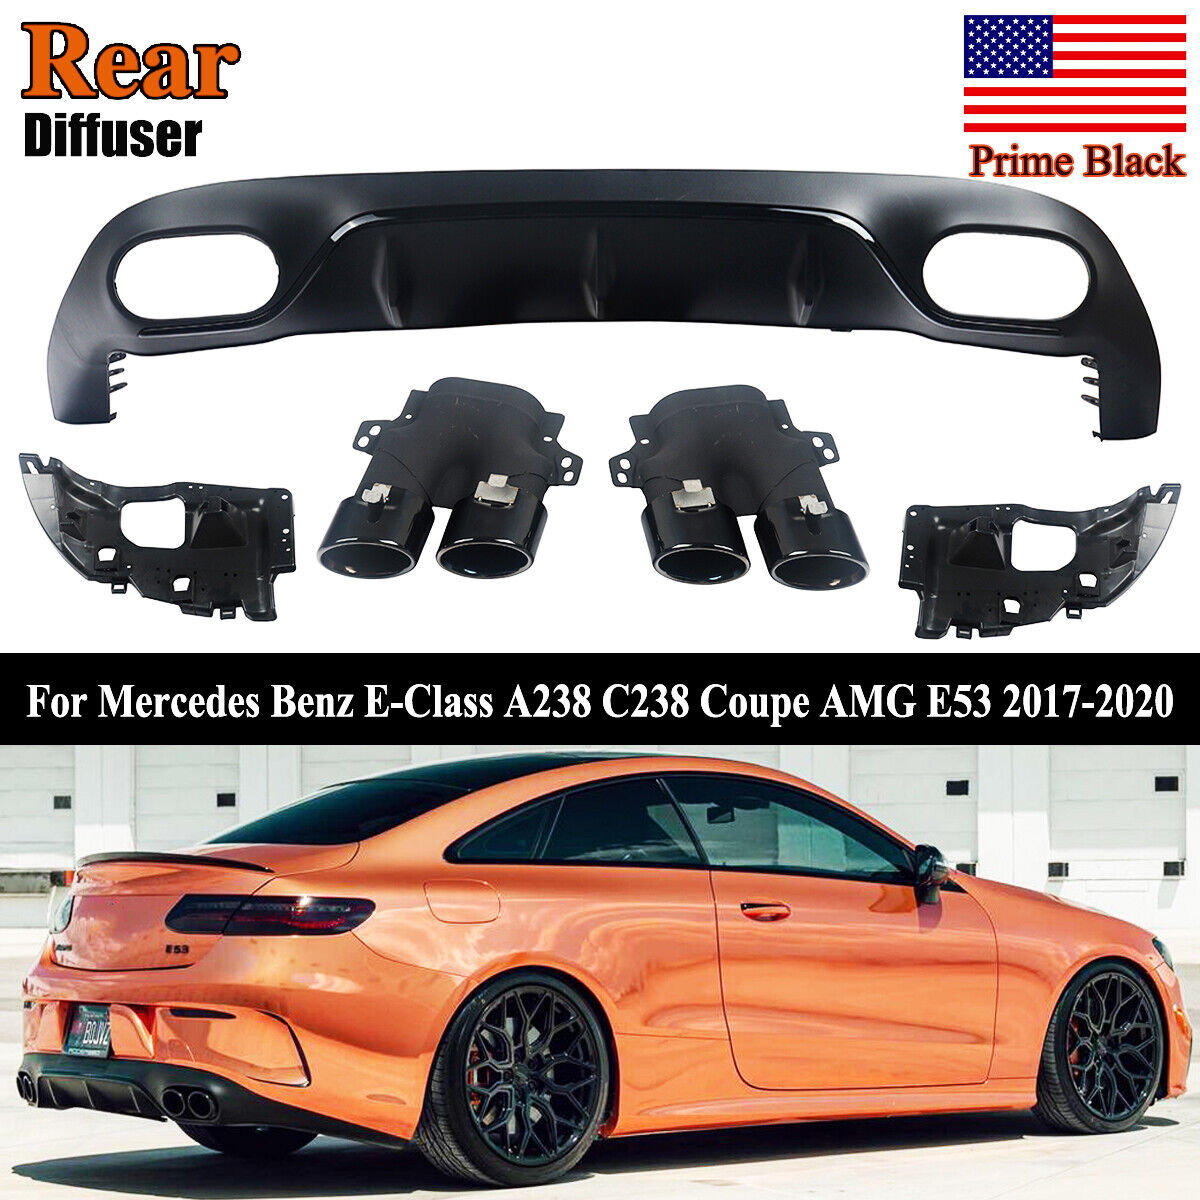 For Mercedes E-Class C238 Coupe A238 AMG E53 Style Rear Diffuser+Tailpipes Tips